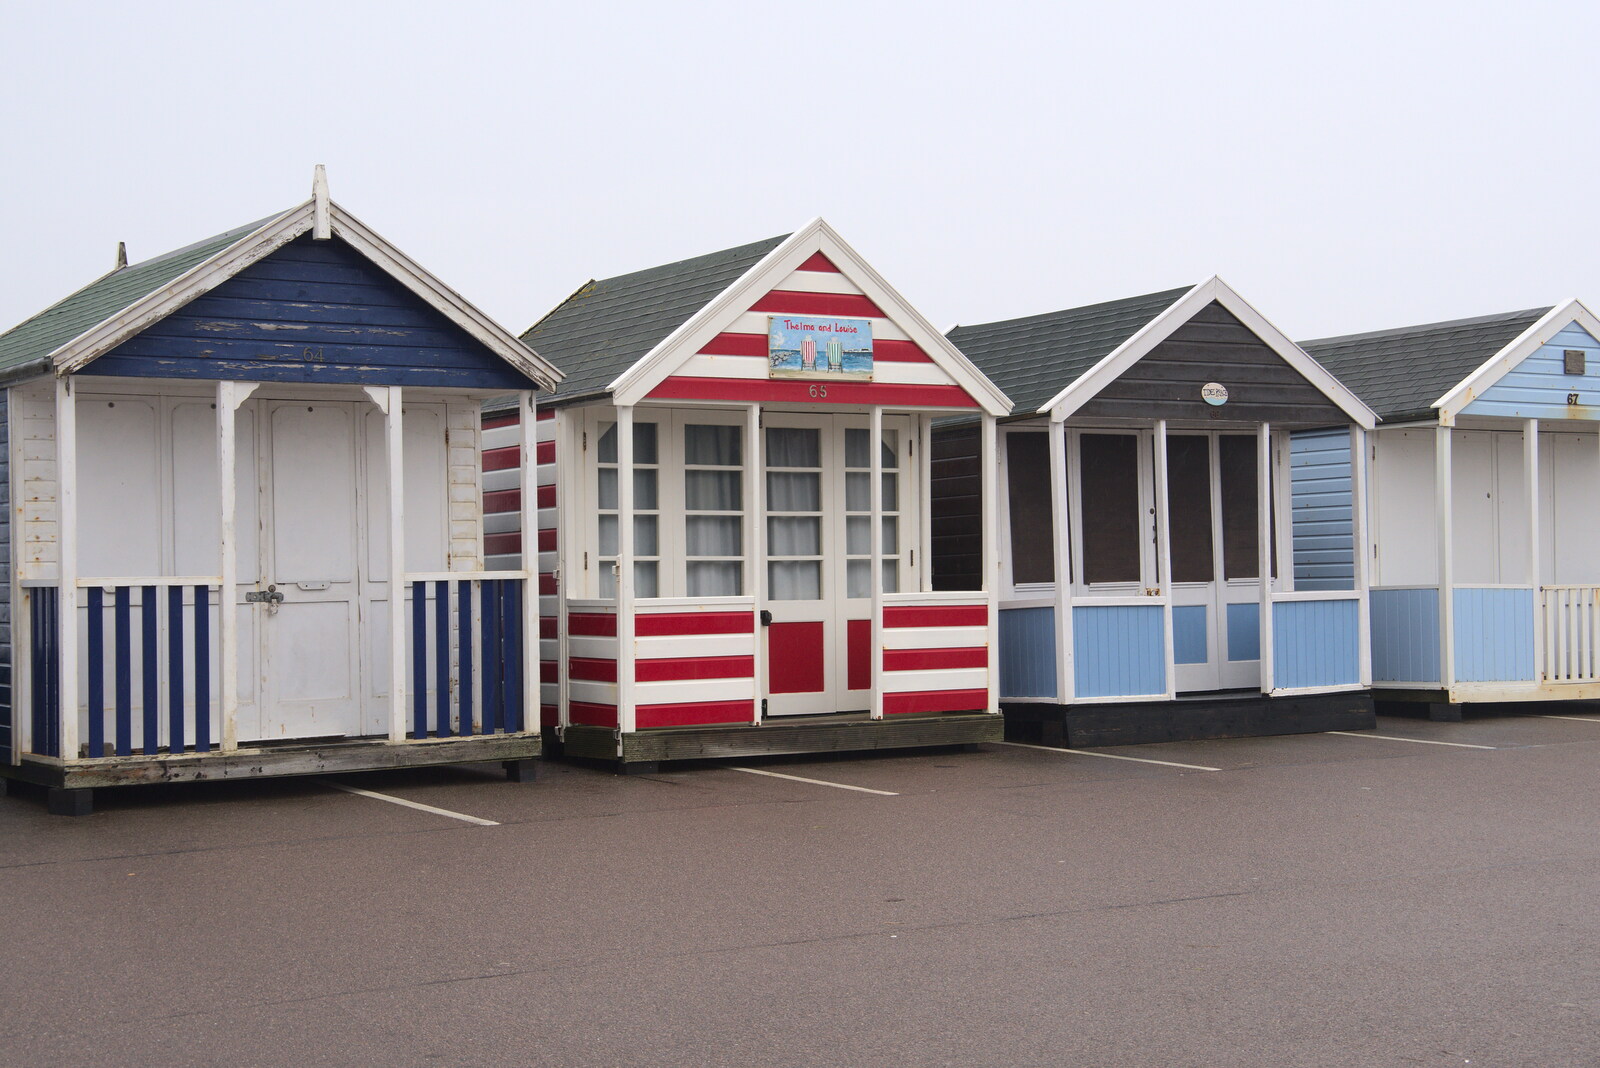 A stripey beach hut from A Few Hours at the Seaside, Southwold, Suffolk - 27th December 2021